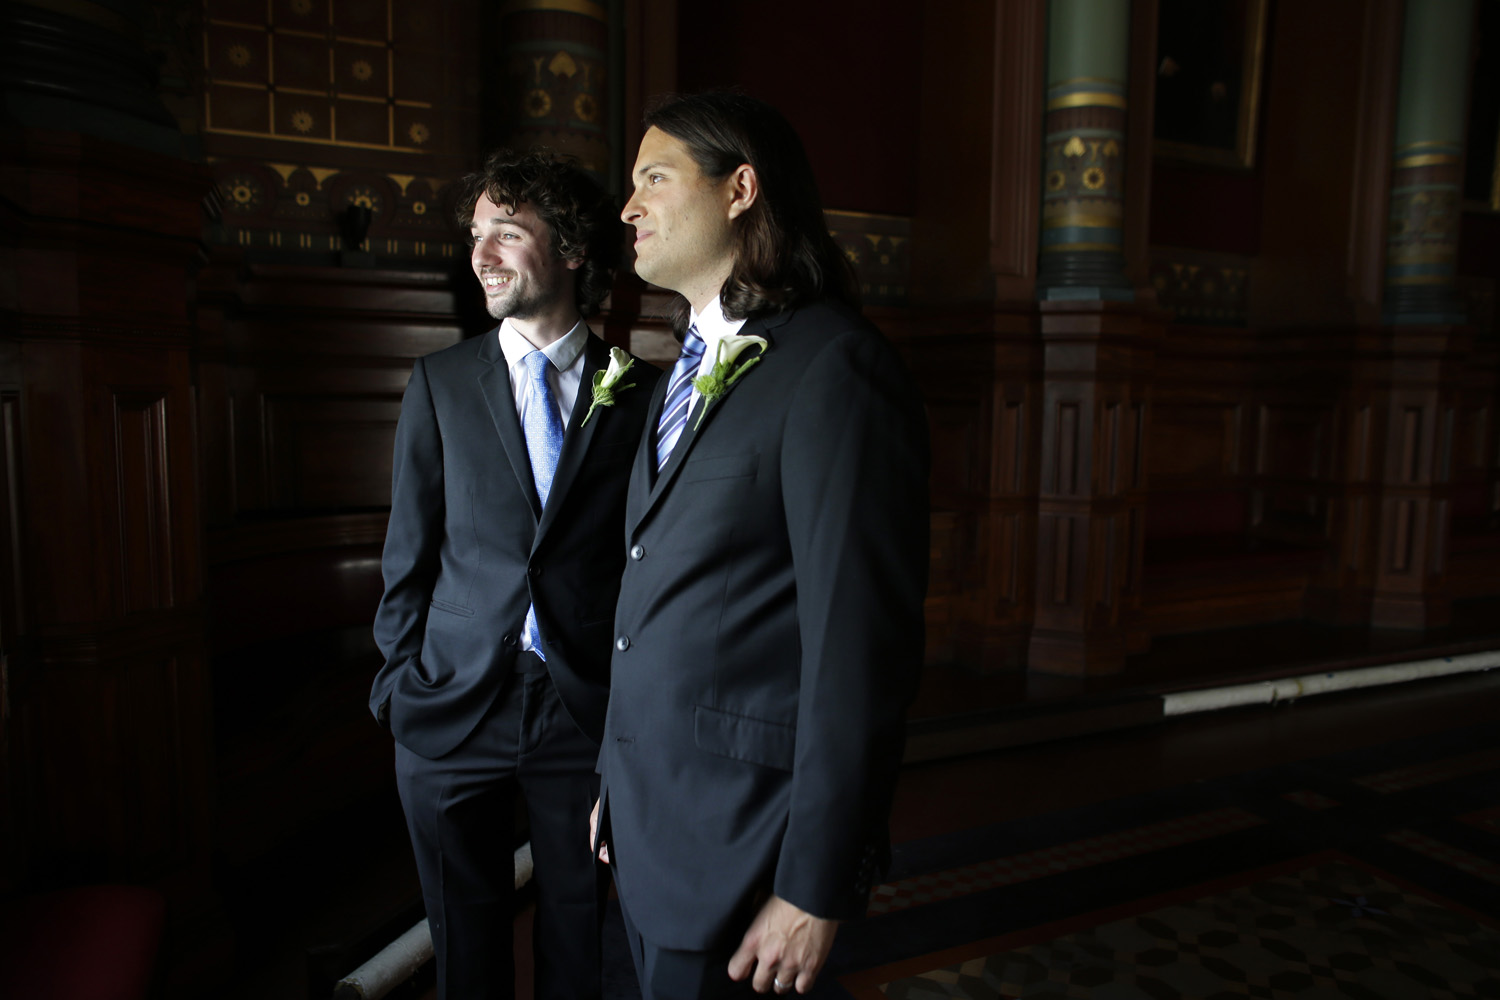 Aug. 1, 2013. Gary McDowell, left, and Zachary Marcus, right, both of Providence, R.I., wait in a meeting room at City Hall in Providence moments before their marriage ceremony.